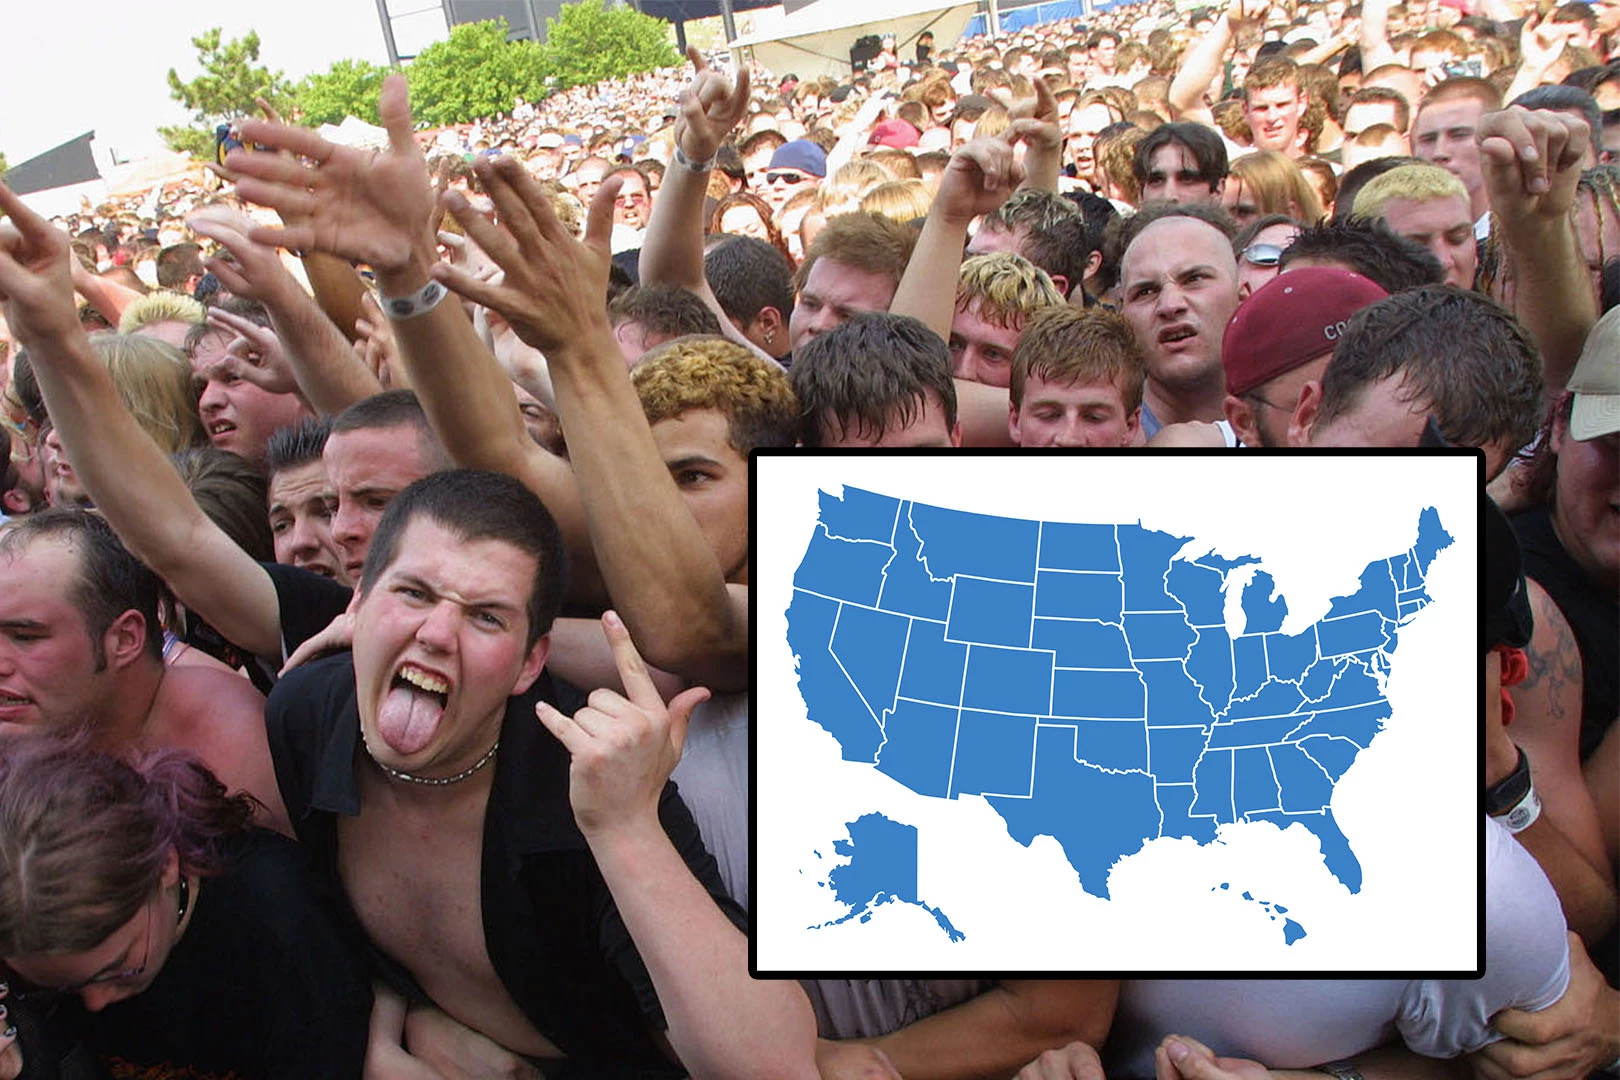 Study Shows Which U.S. States Have the 'Rowdiest' Concert Crowds